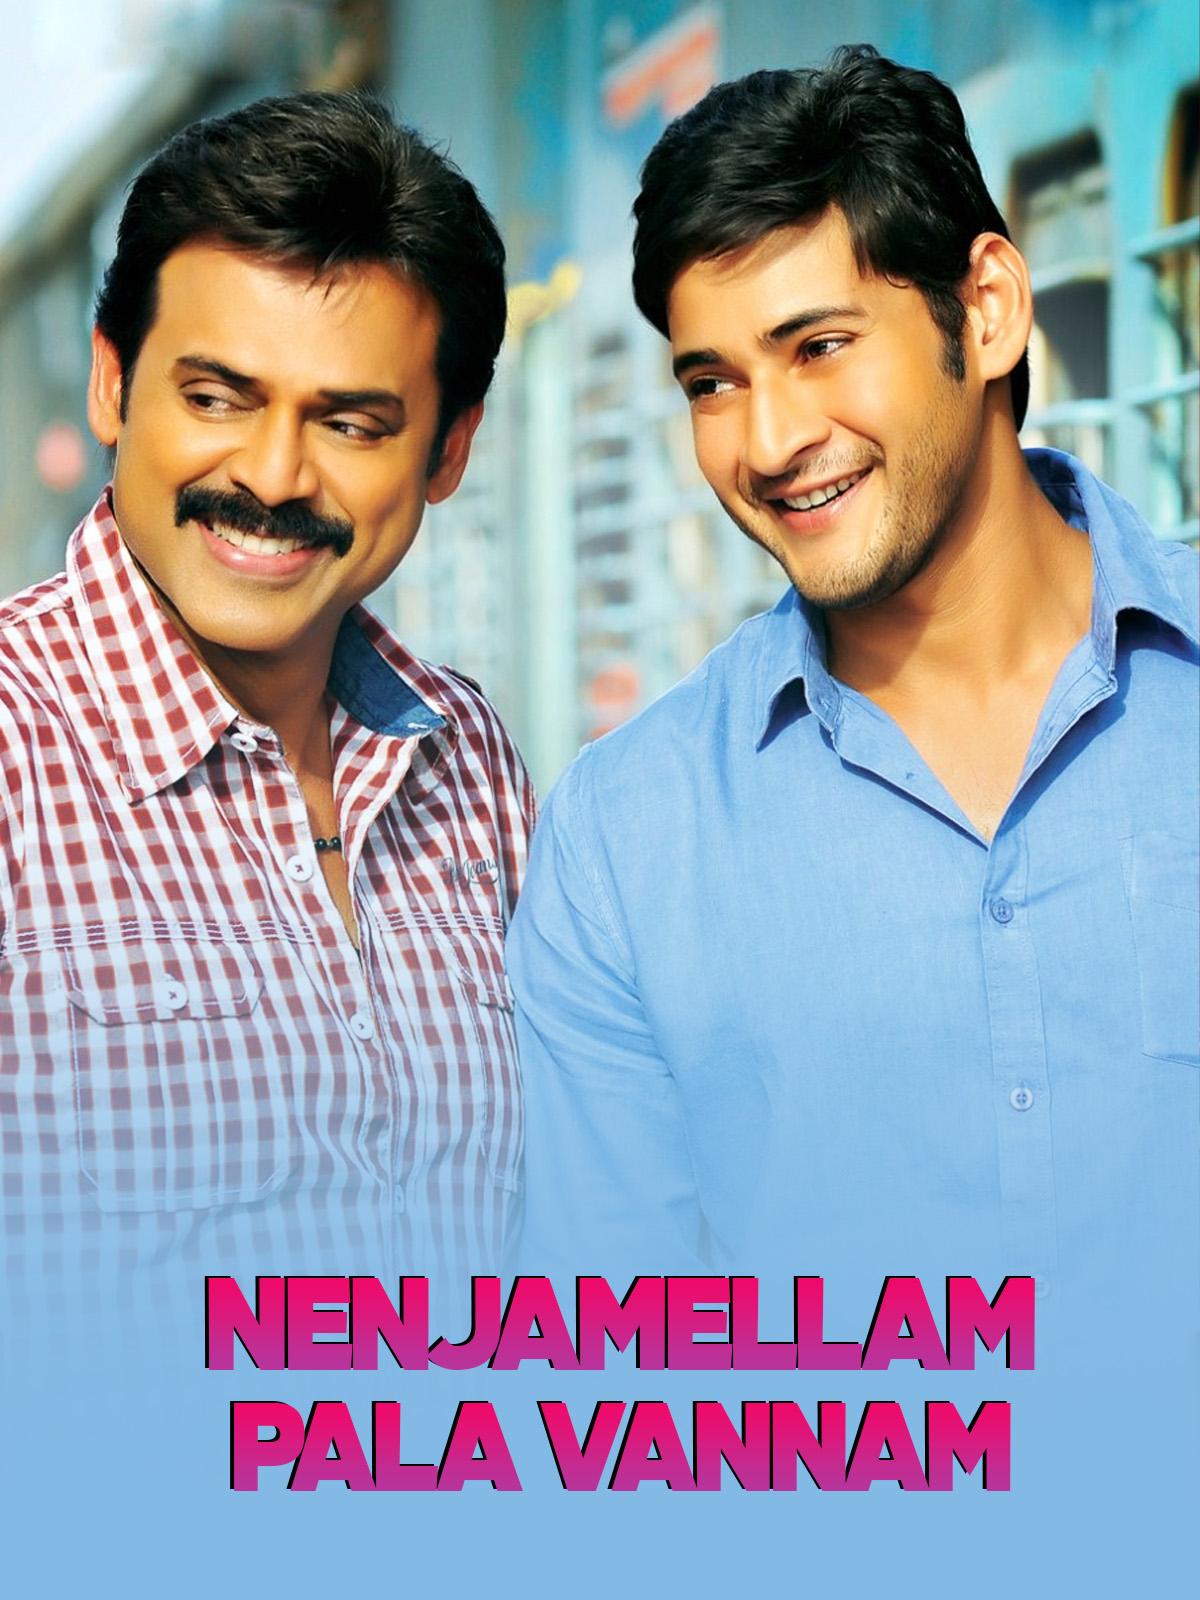 Nenjamellam Pala Vannam (2013): This emotionally charged family drama places the spotlight on two brothers